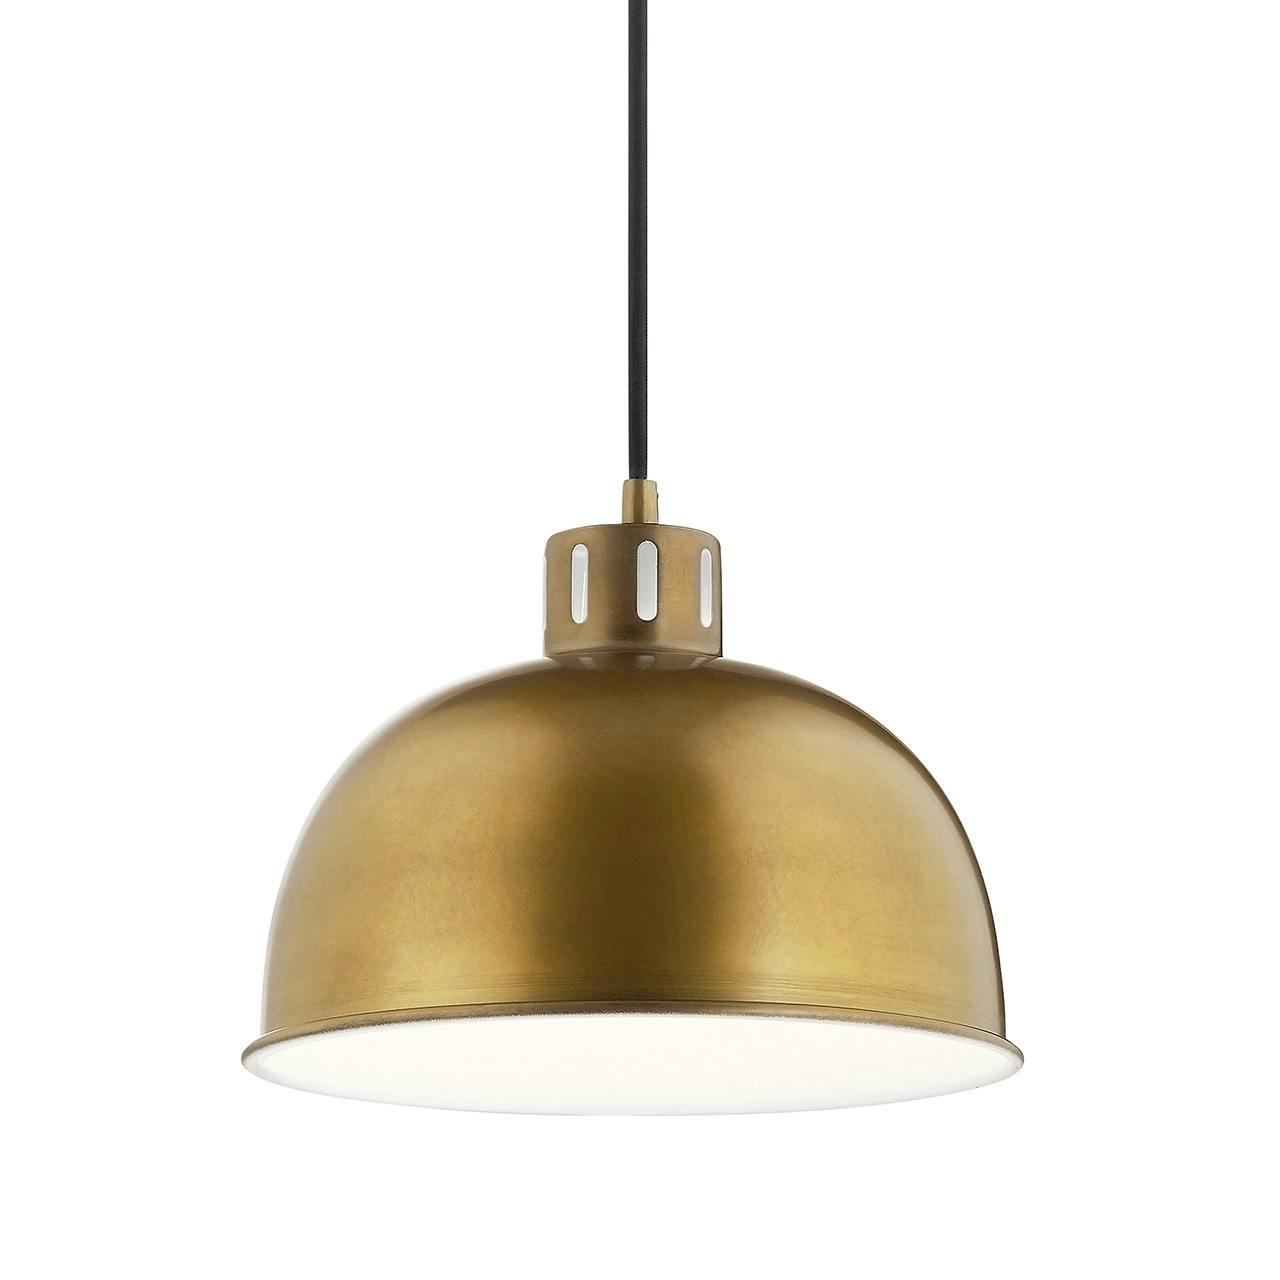 Zailey 9" 1 Light Pendant in Brass without the canopy on a white background